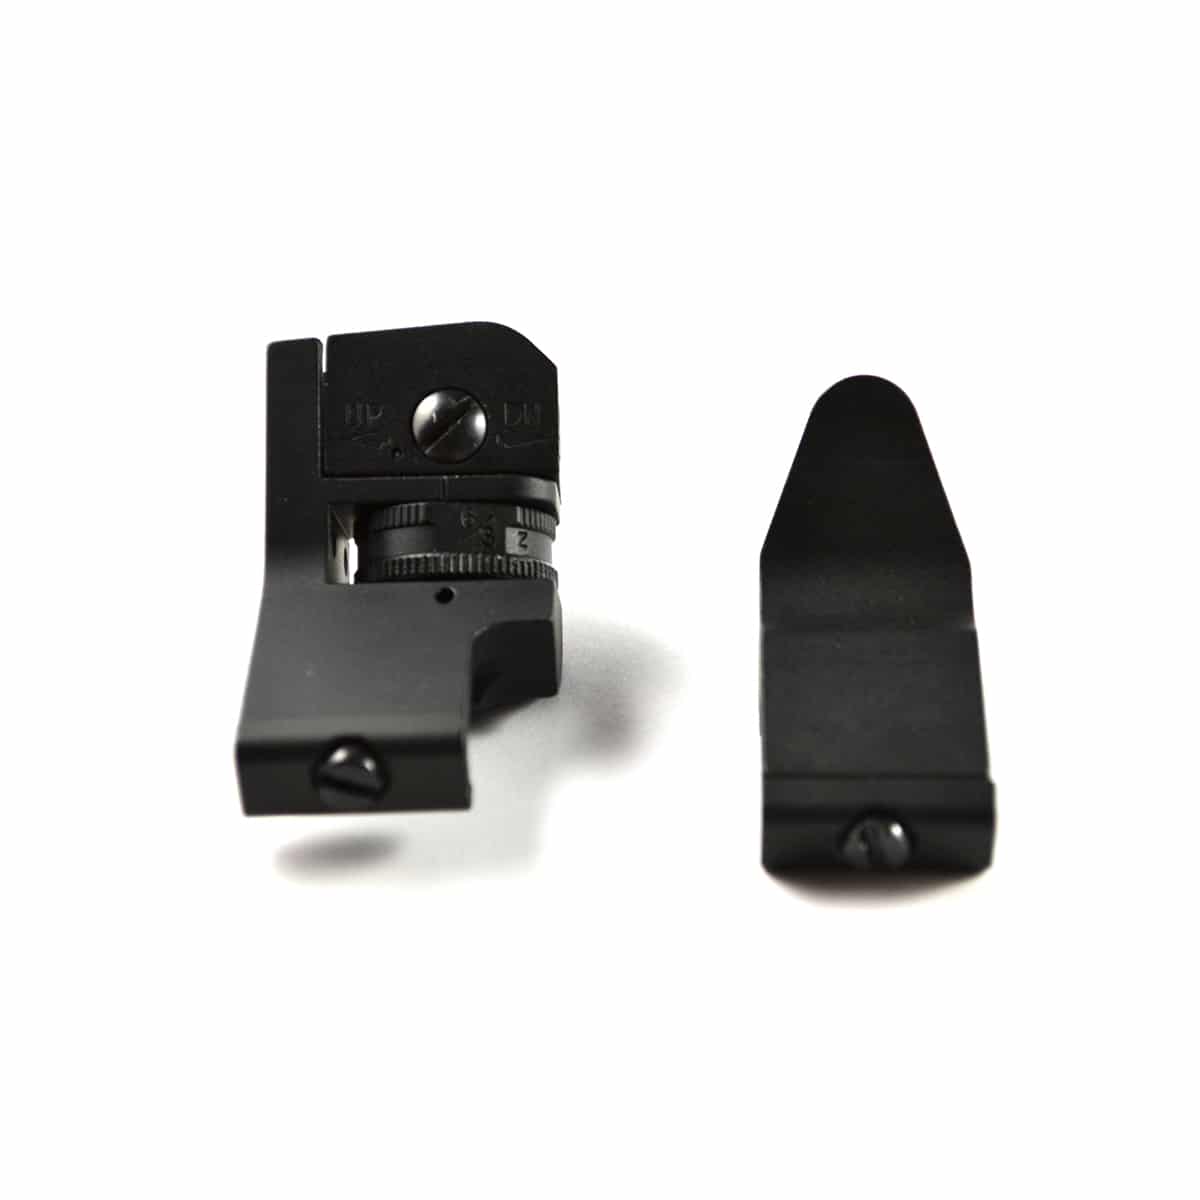 45 Degree AR 15 Offset Iron Sights by AT3